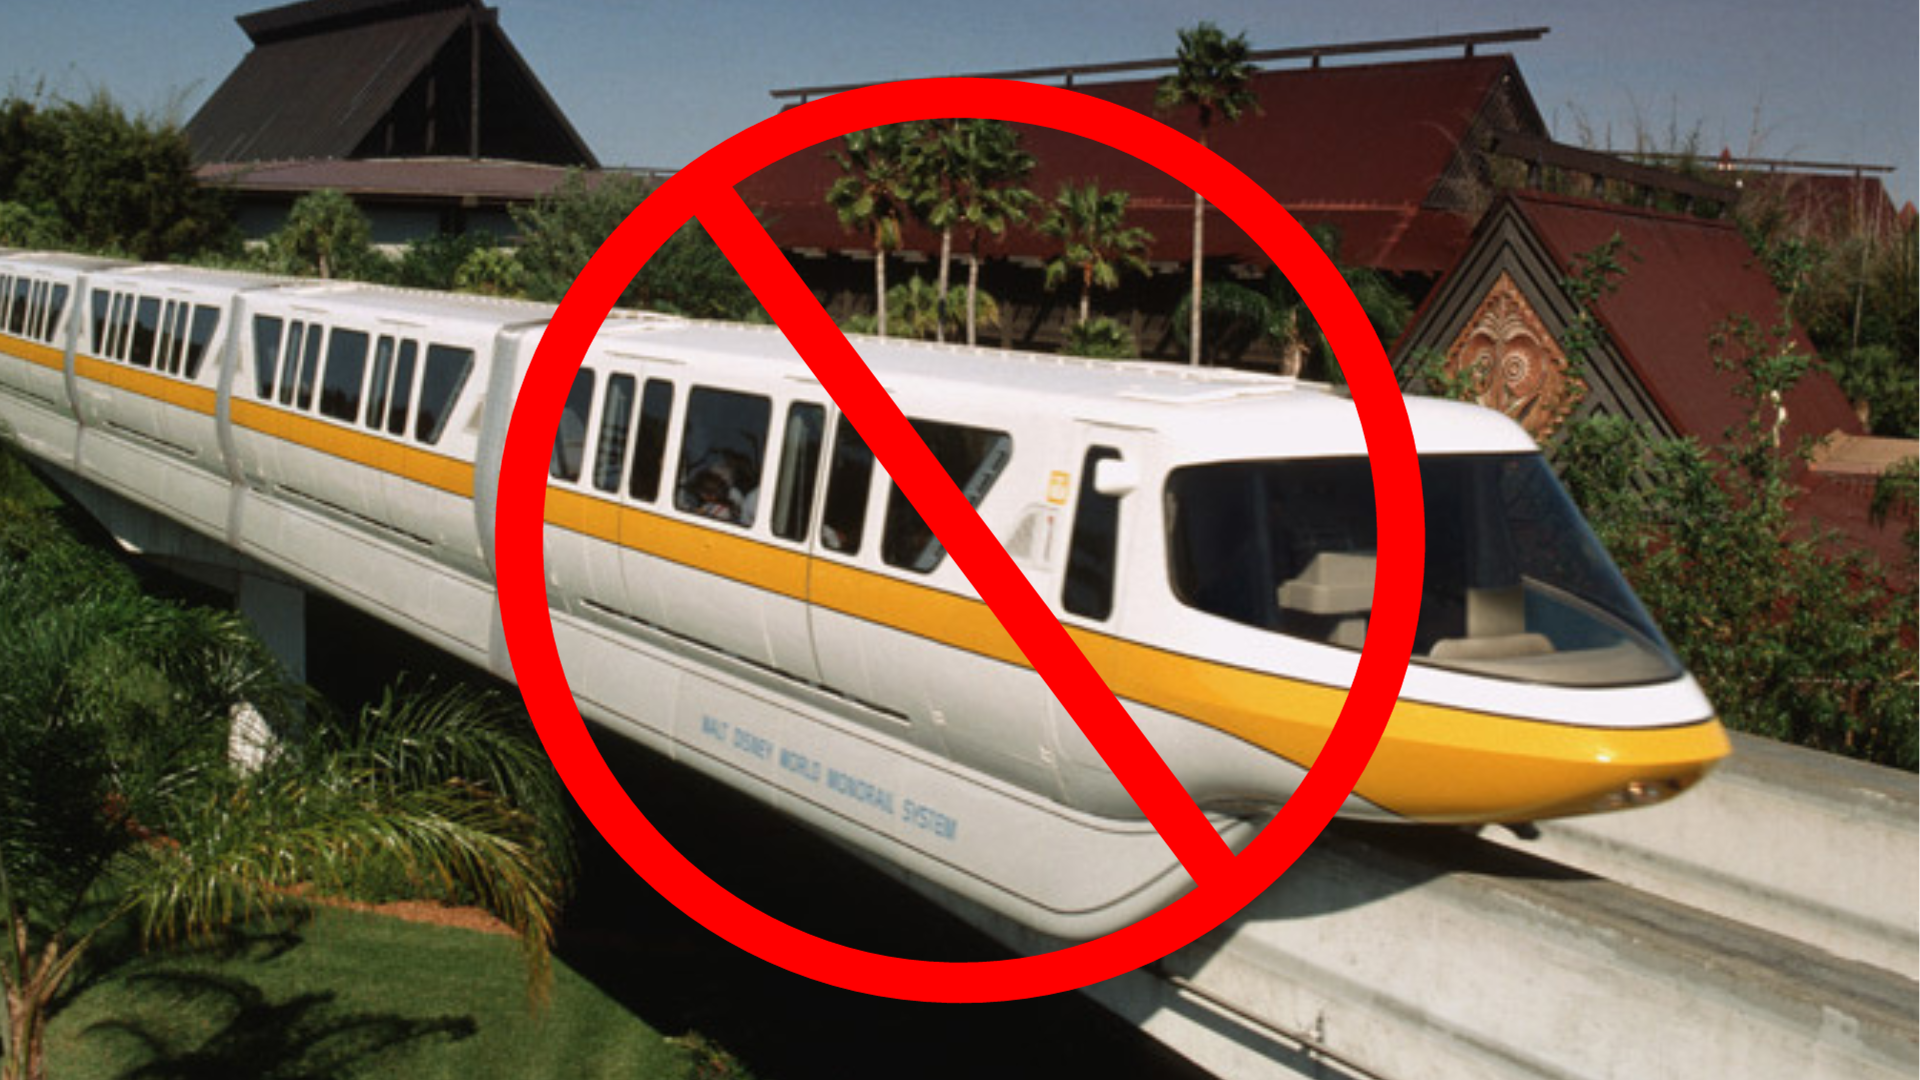 Disney World Closing Monorails, Replacing with Walkways